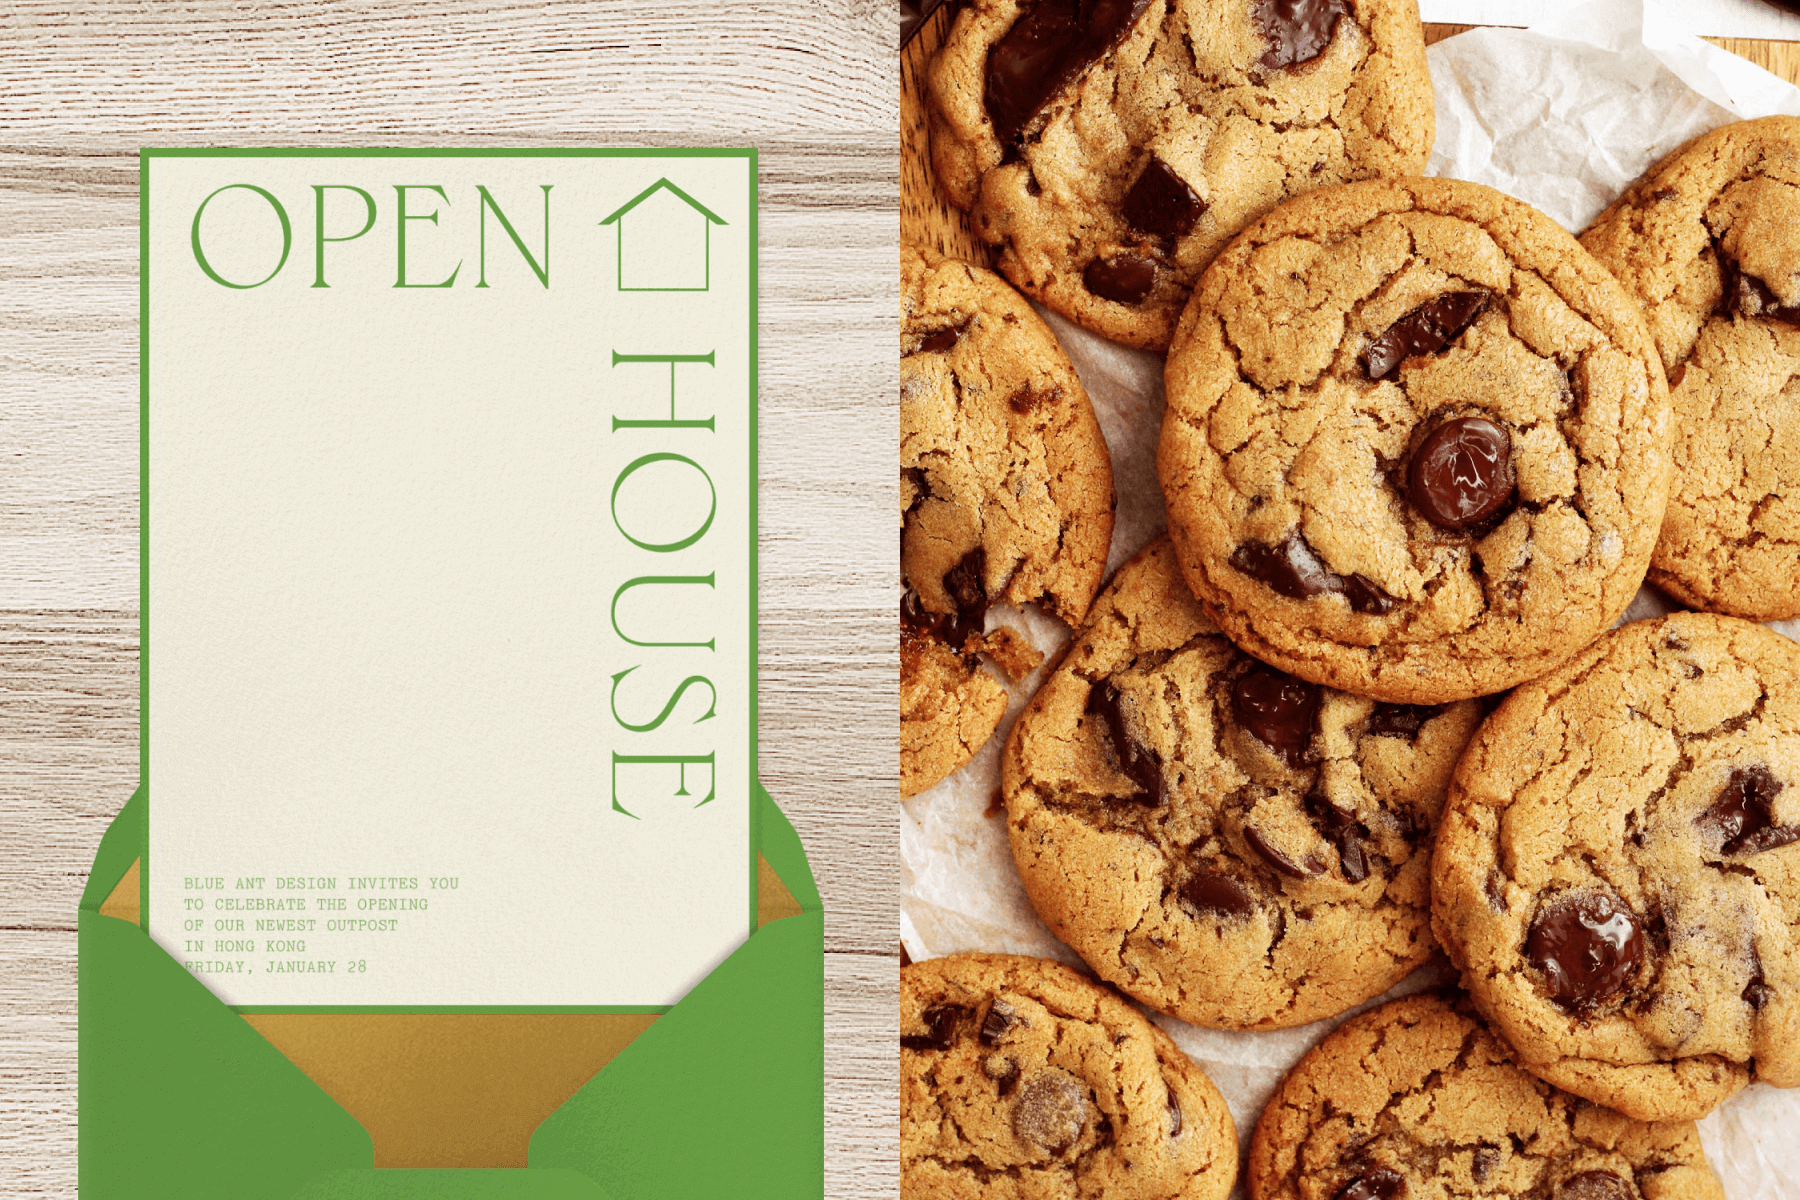 Left: A minimalist open house invitation with a thin green border and the words OPEN HOUSE and a simple drawing of a house along the top and right side. Right: A close-up shot of a batch of chocolate chip cookies.